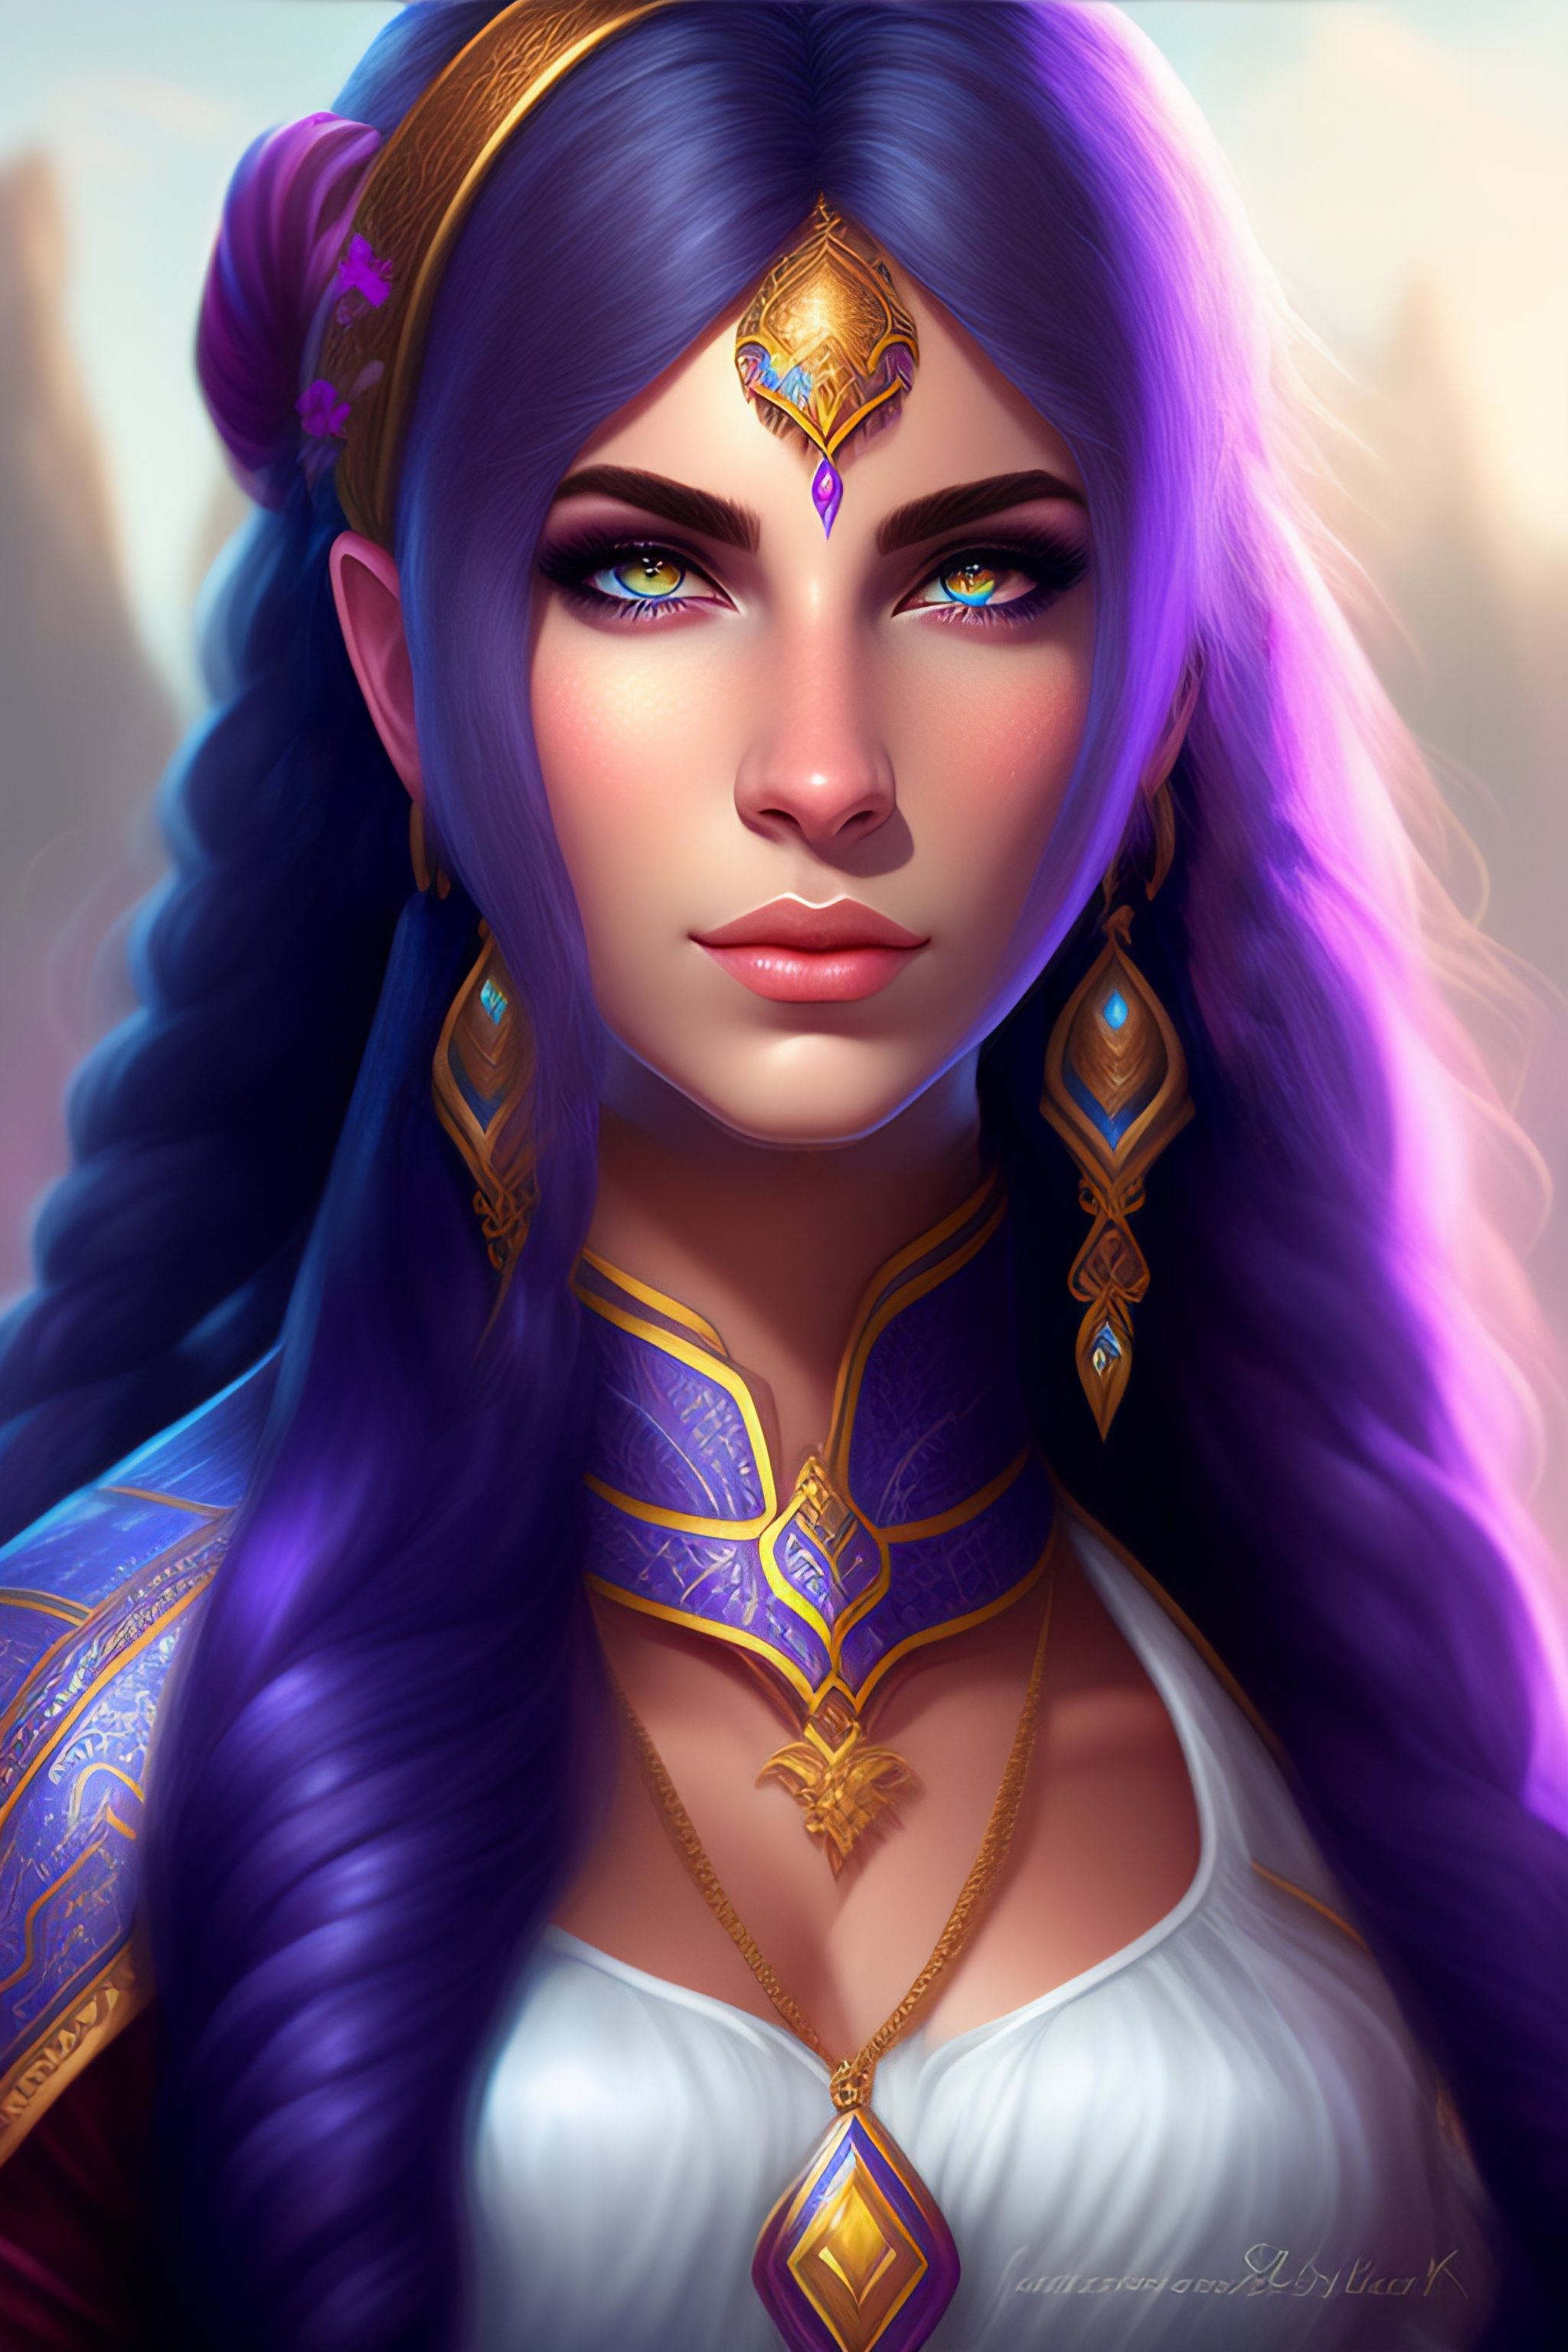 Lexica - Highly detailed portrait of a young Draenei girl